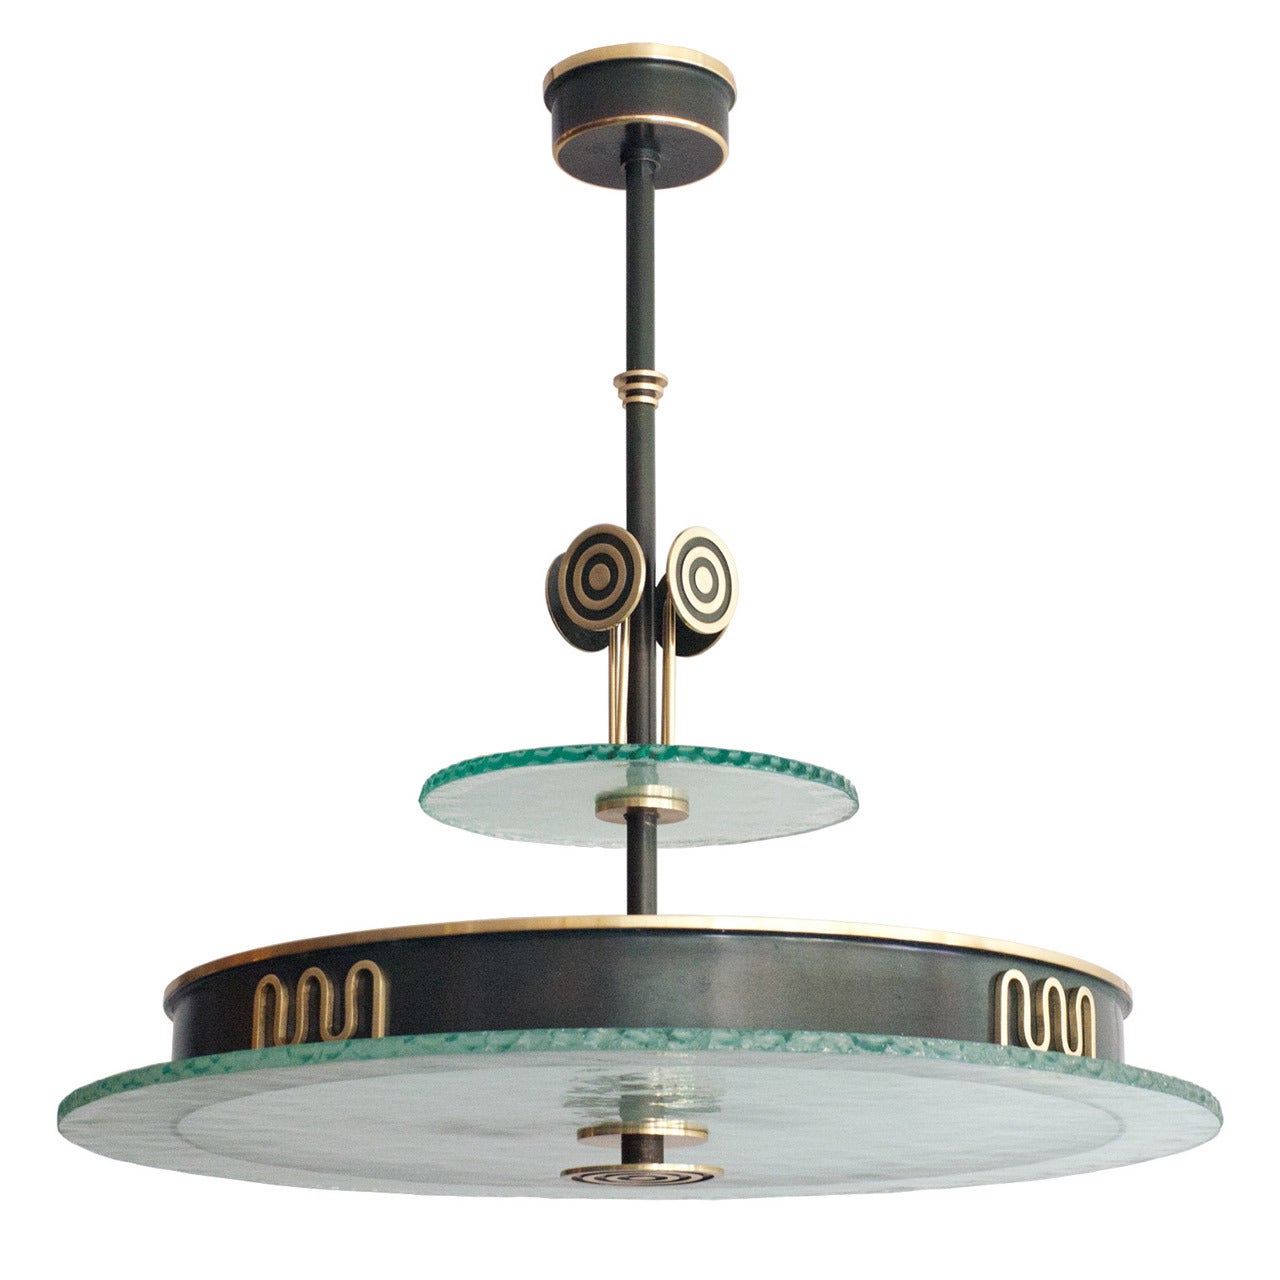 Swedish Art Deco pendant of patinated and polished brass from Bohlmarks.